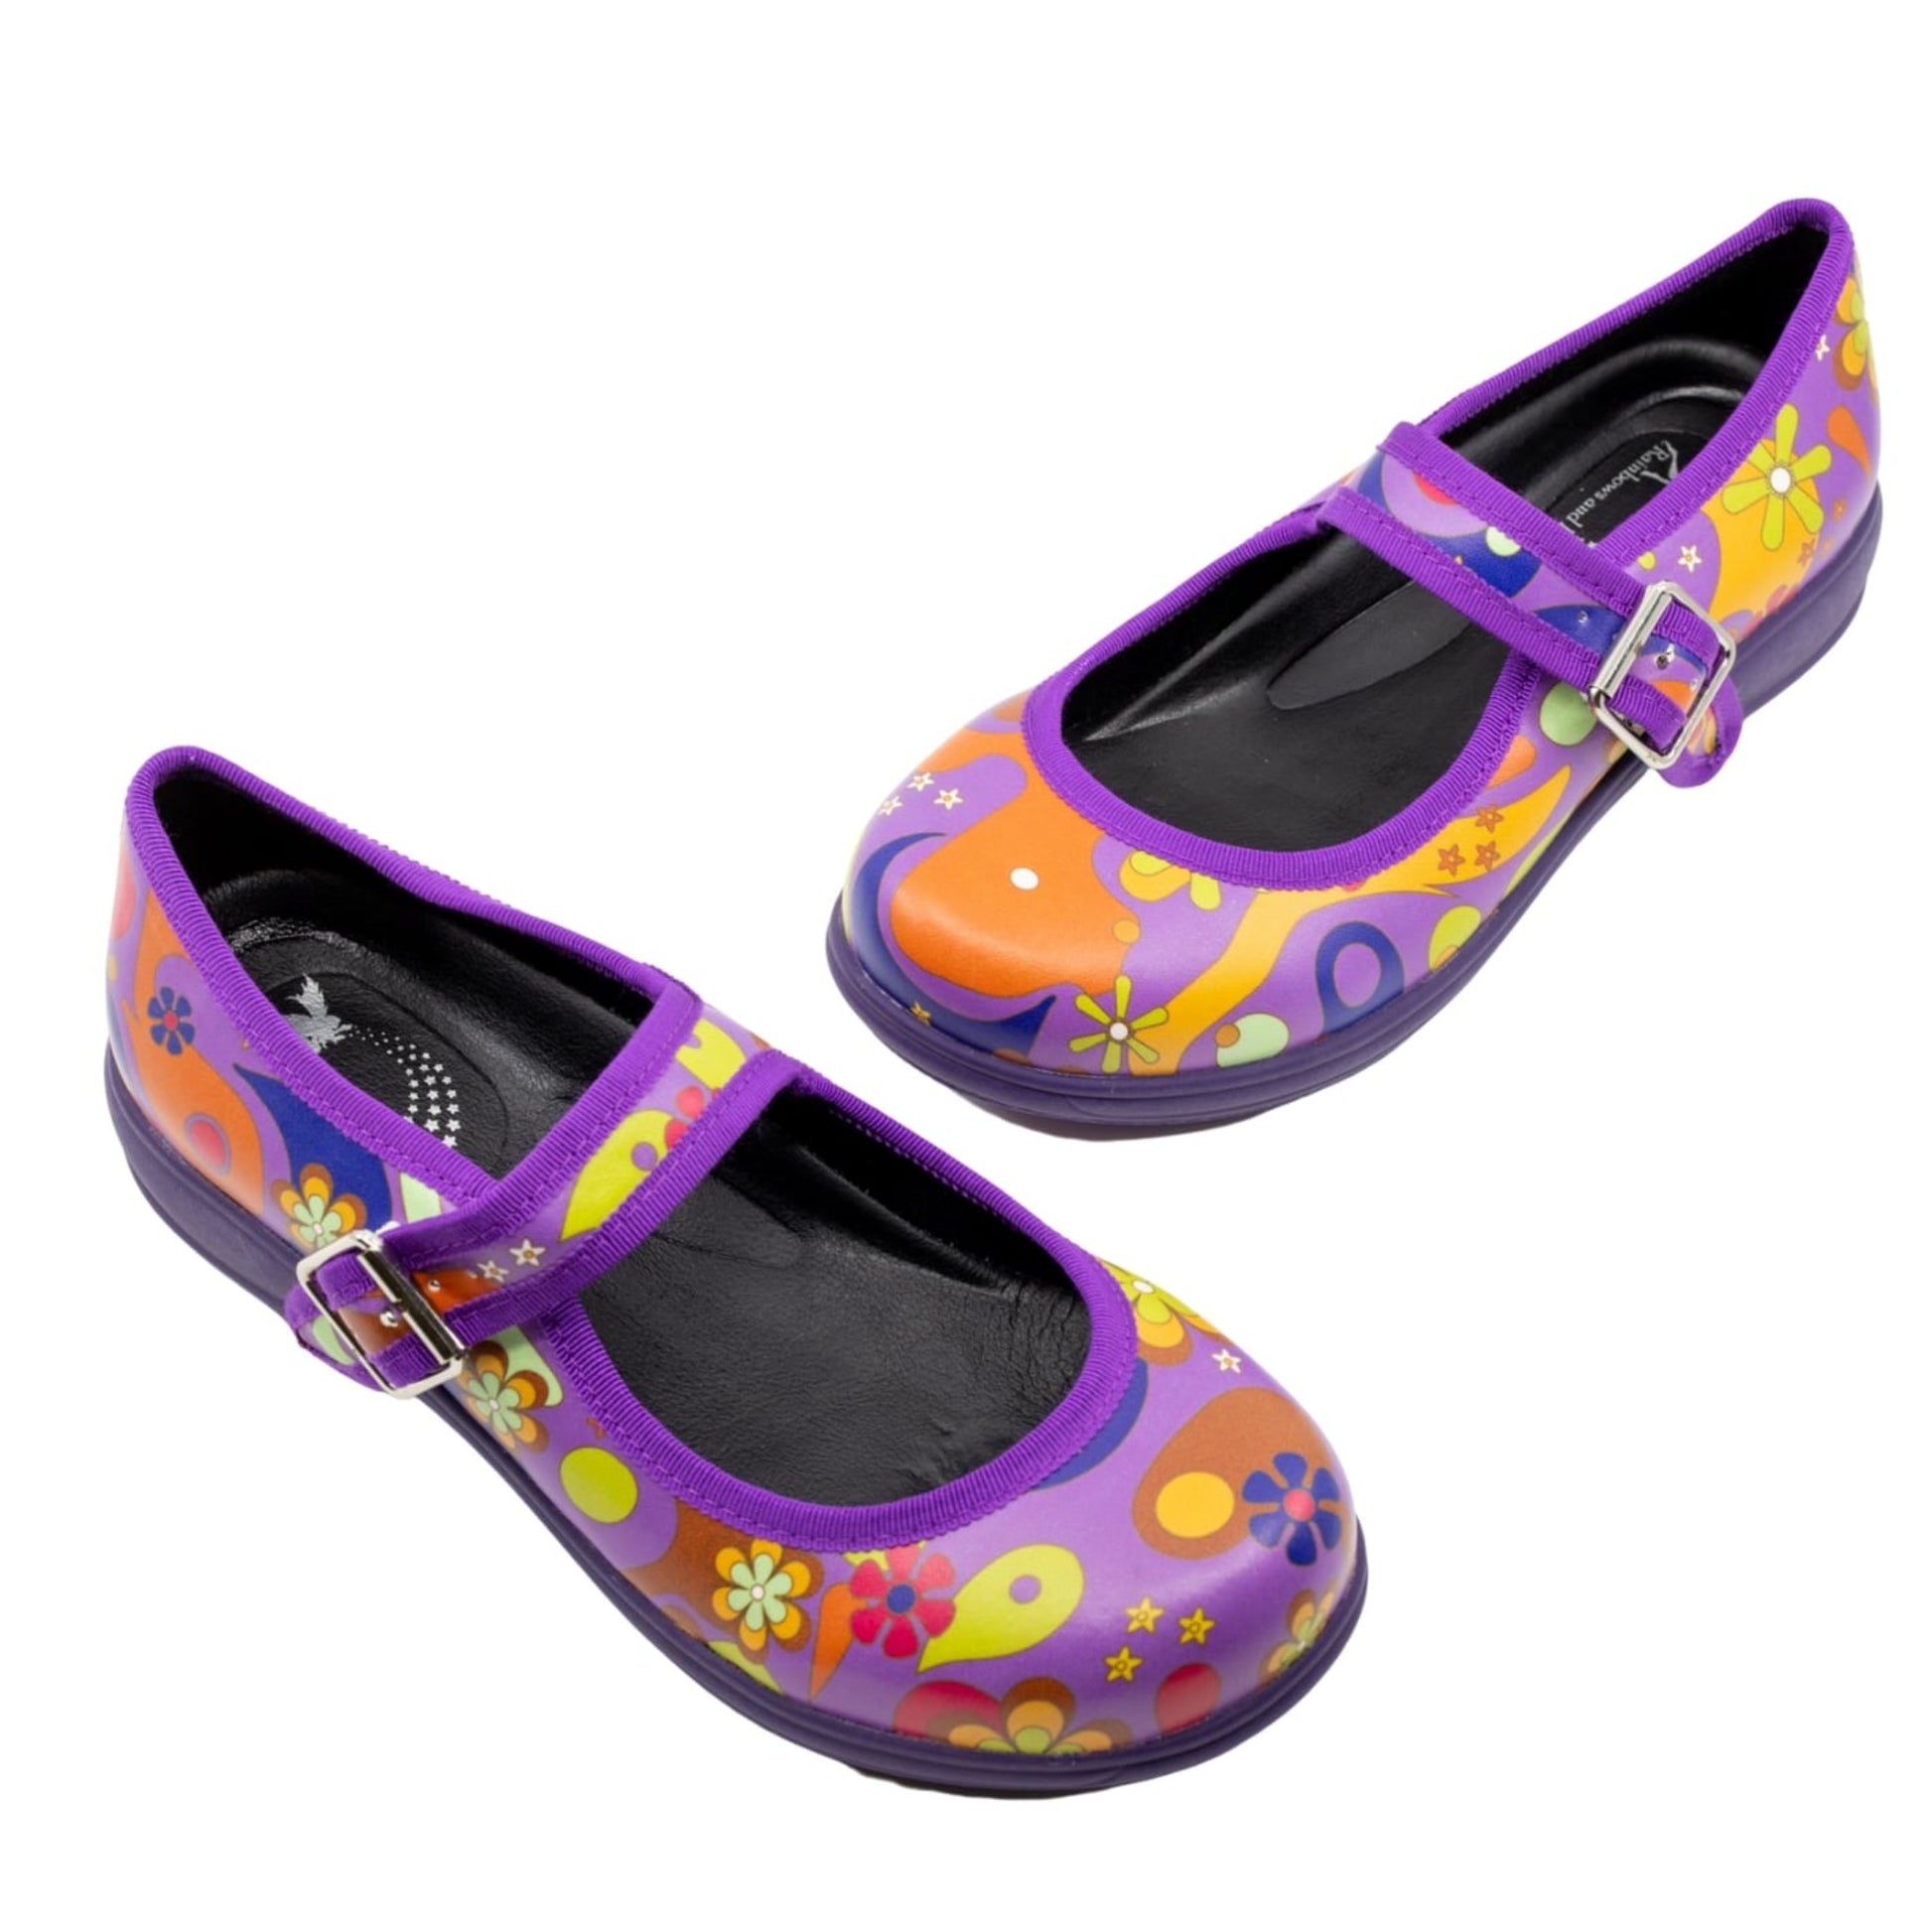 Flower Power Mary Janes by RainbowsAndFairies.com.au (Floral Print - Woodstock - Pyschedelic - Mary Janes - Mismatched Shoes - Buckle Up Shoes - Cute) - SKU: FW_MARYJ_FLOPO_ORG - Pic-01